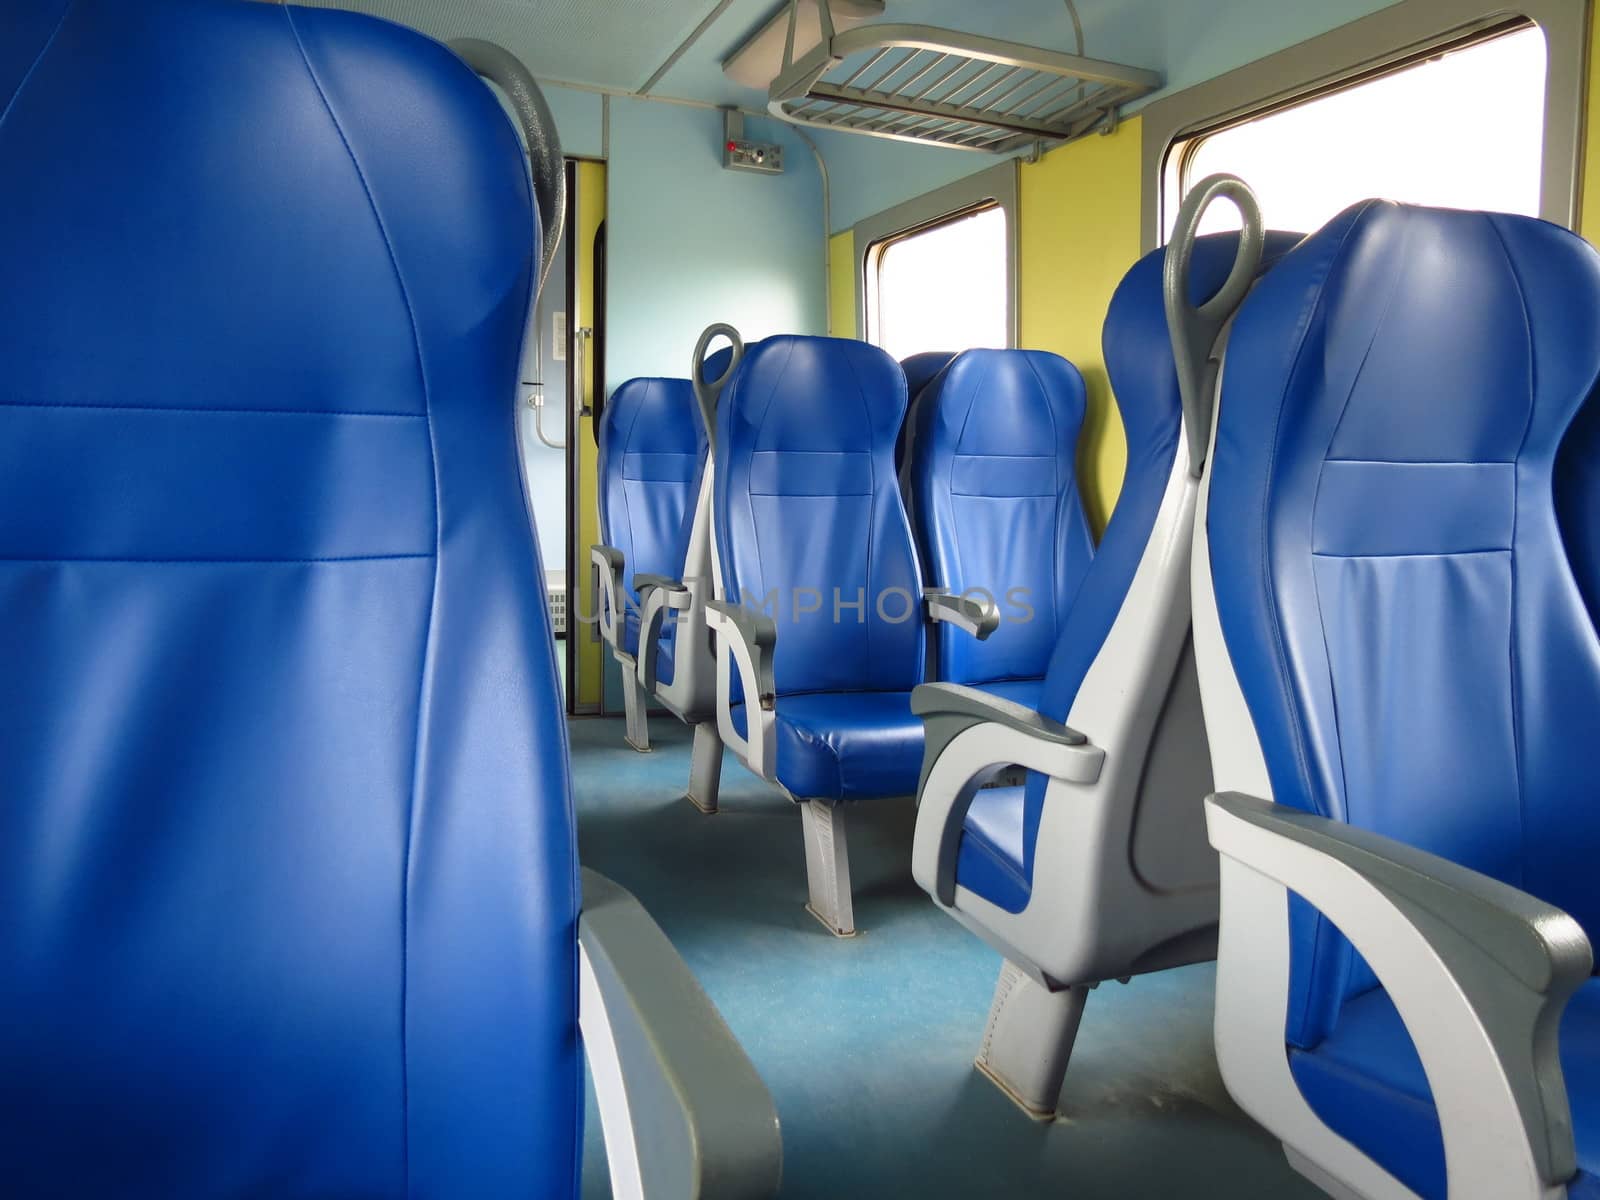 train seats by paolo77